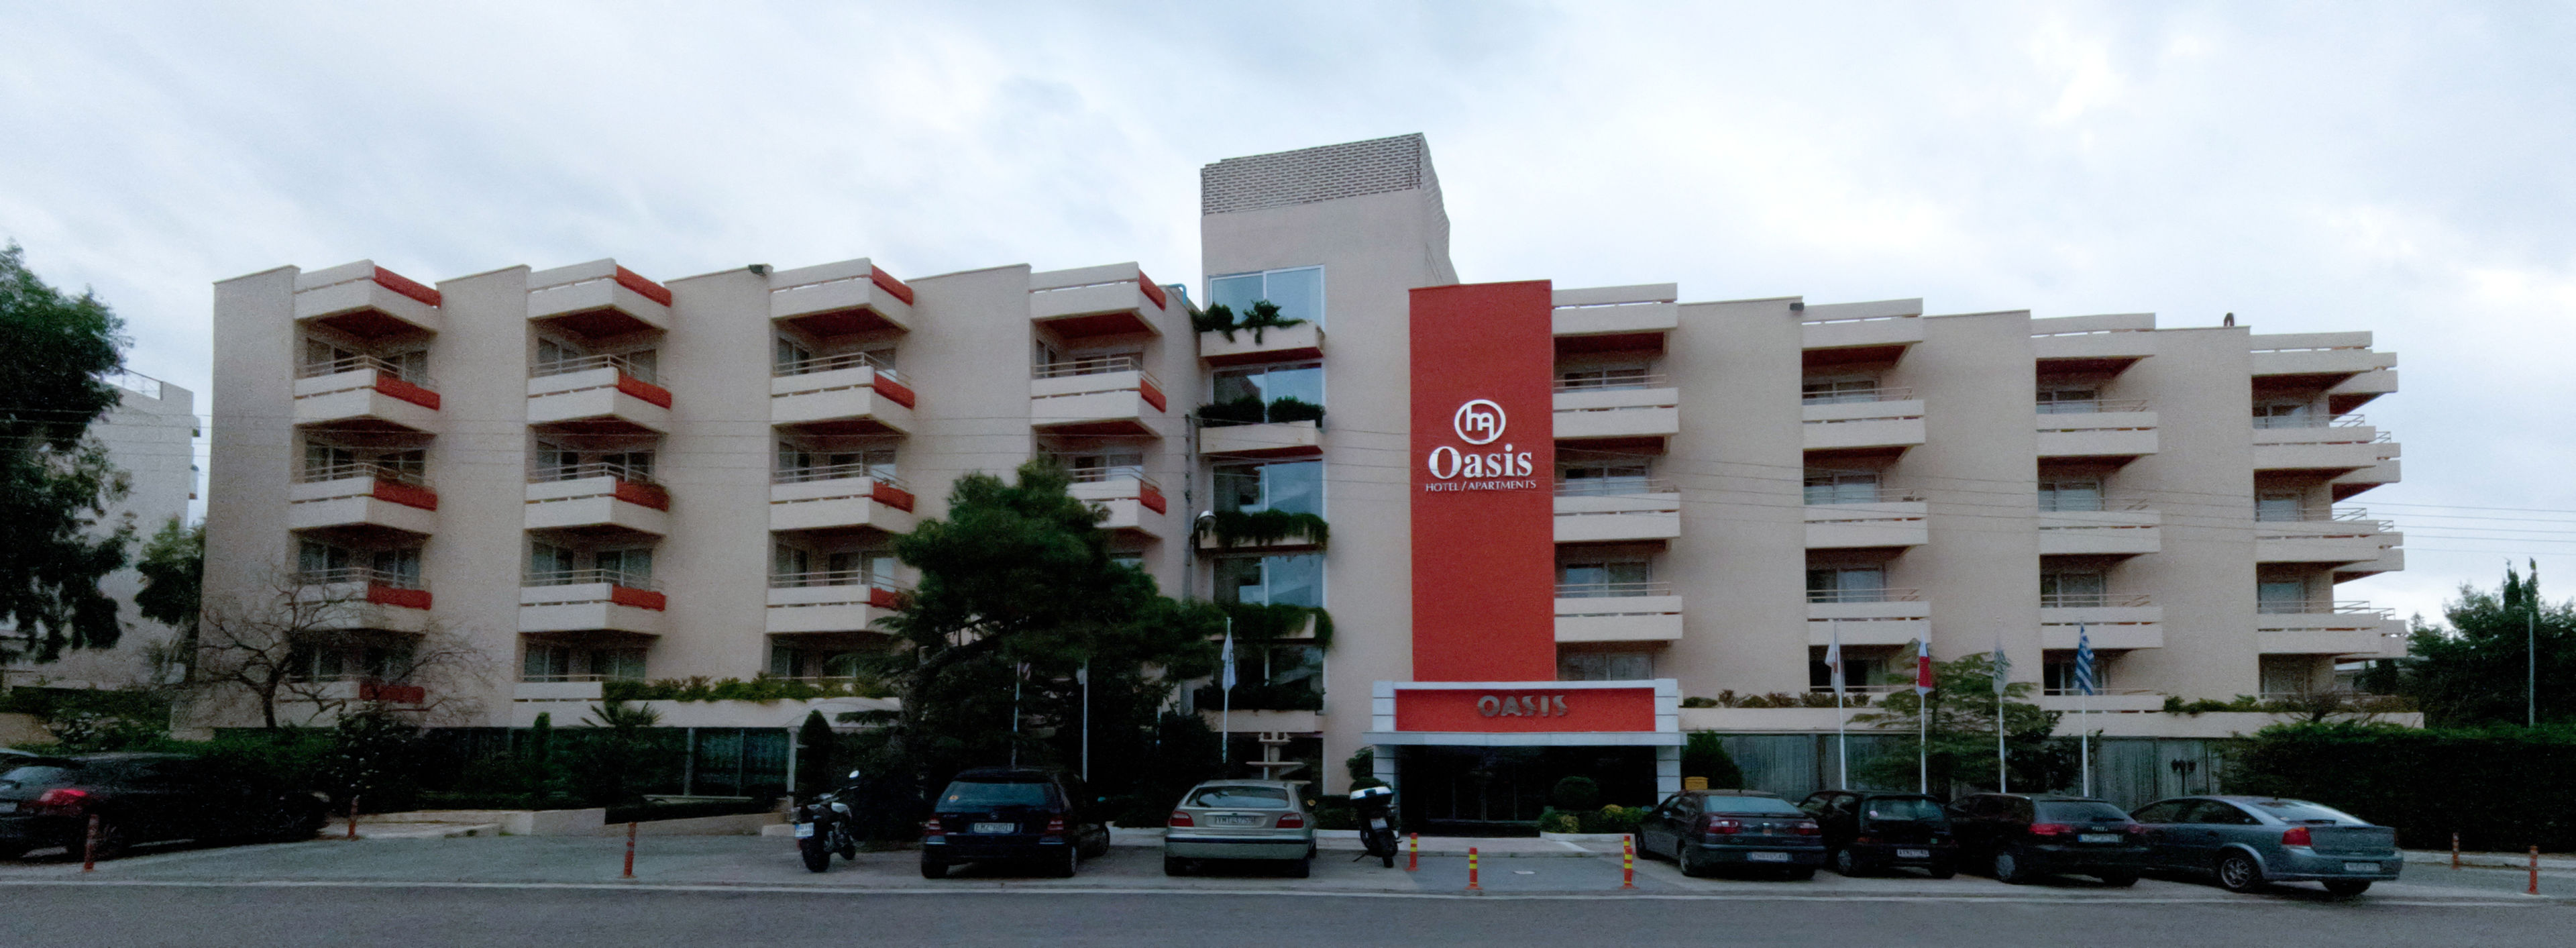 Oasis Hotel - Apartments